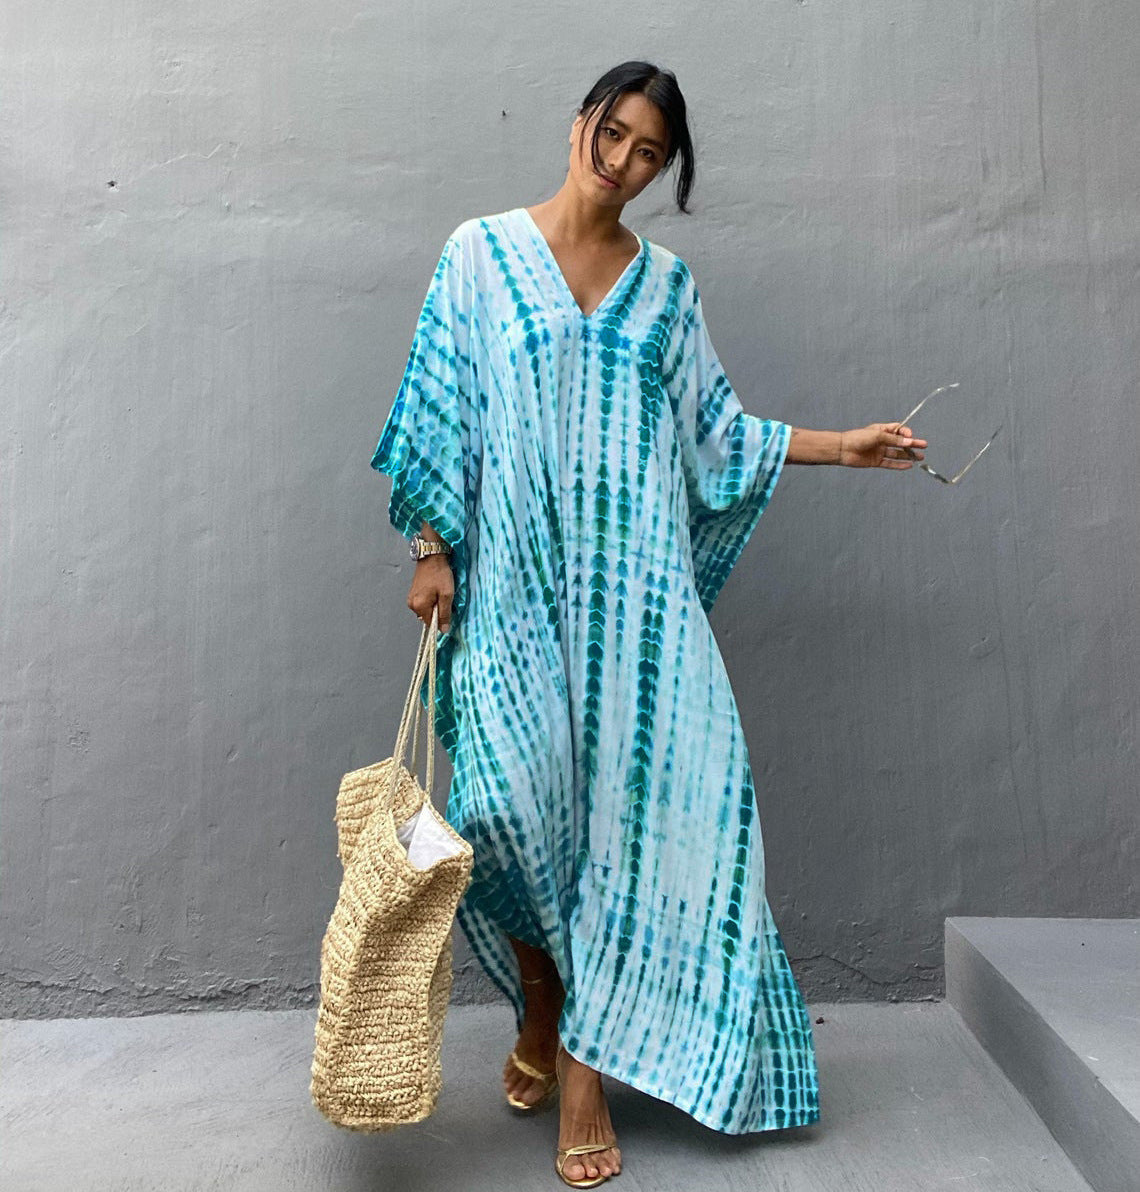 Cotton Beach Cover-up Robe Dress Accessories for women